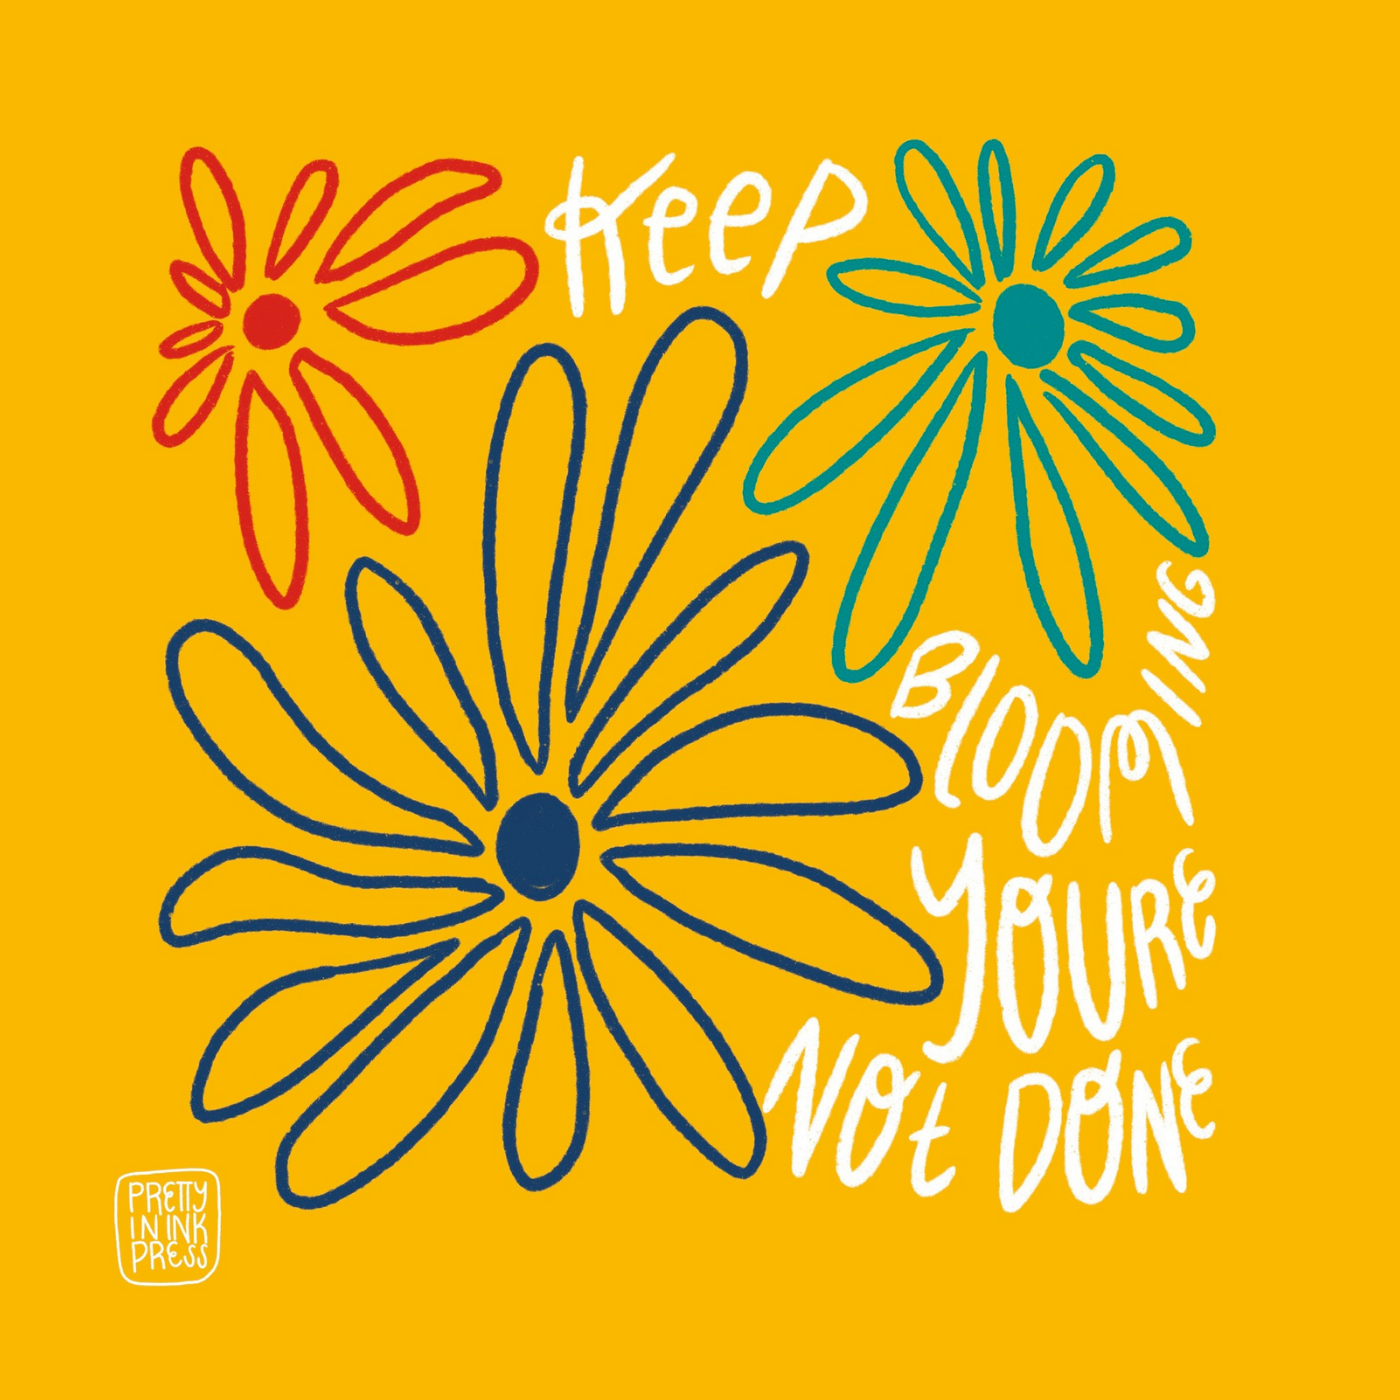 Red, teal and blue outlined flowers emerge from and around the words "keep blooming you're not done" in white cursive text. The words "Pink In Ink Press" in small white all caps font and inside a small white rectangle are in the bottom left corner.